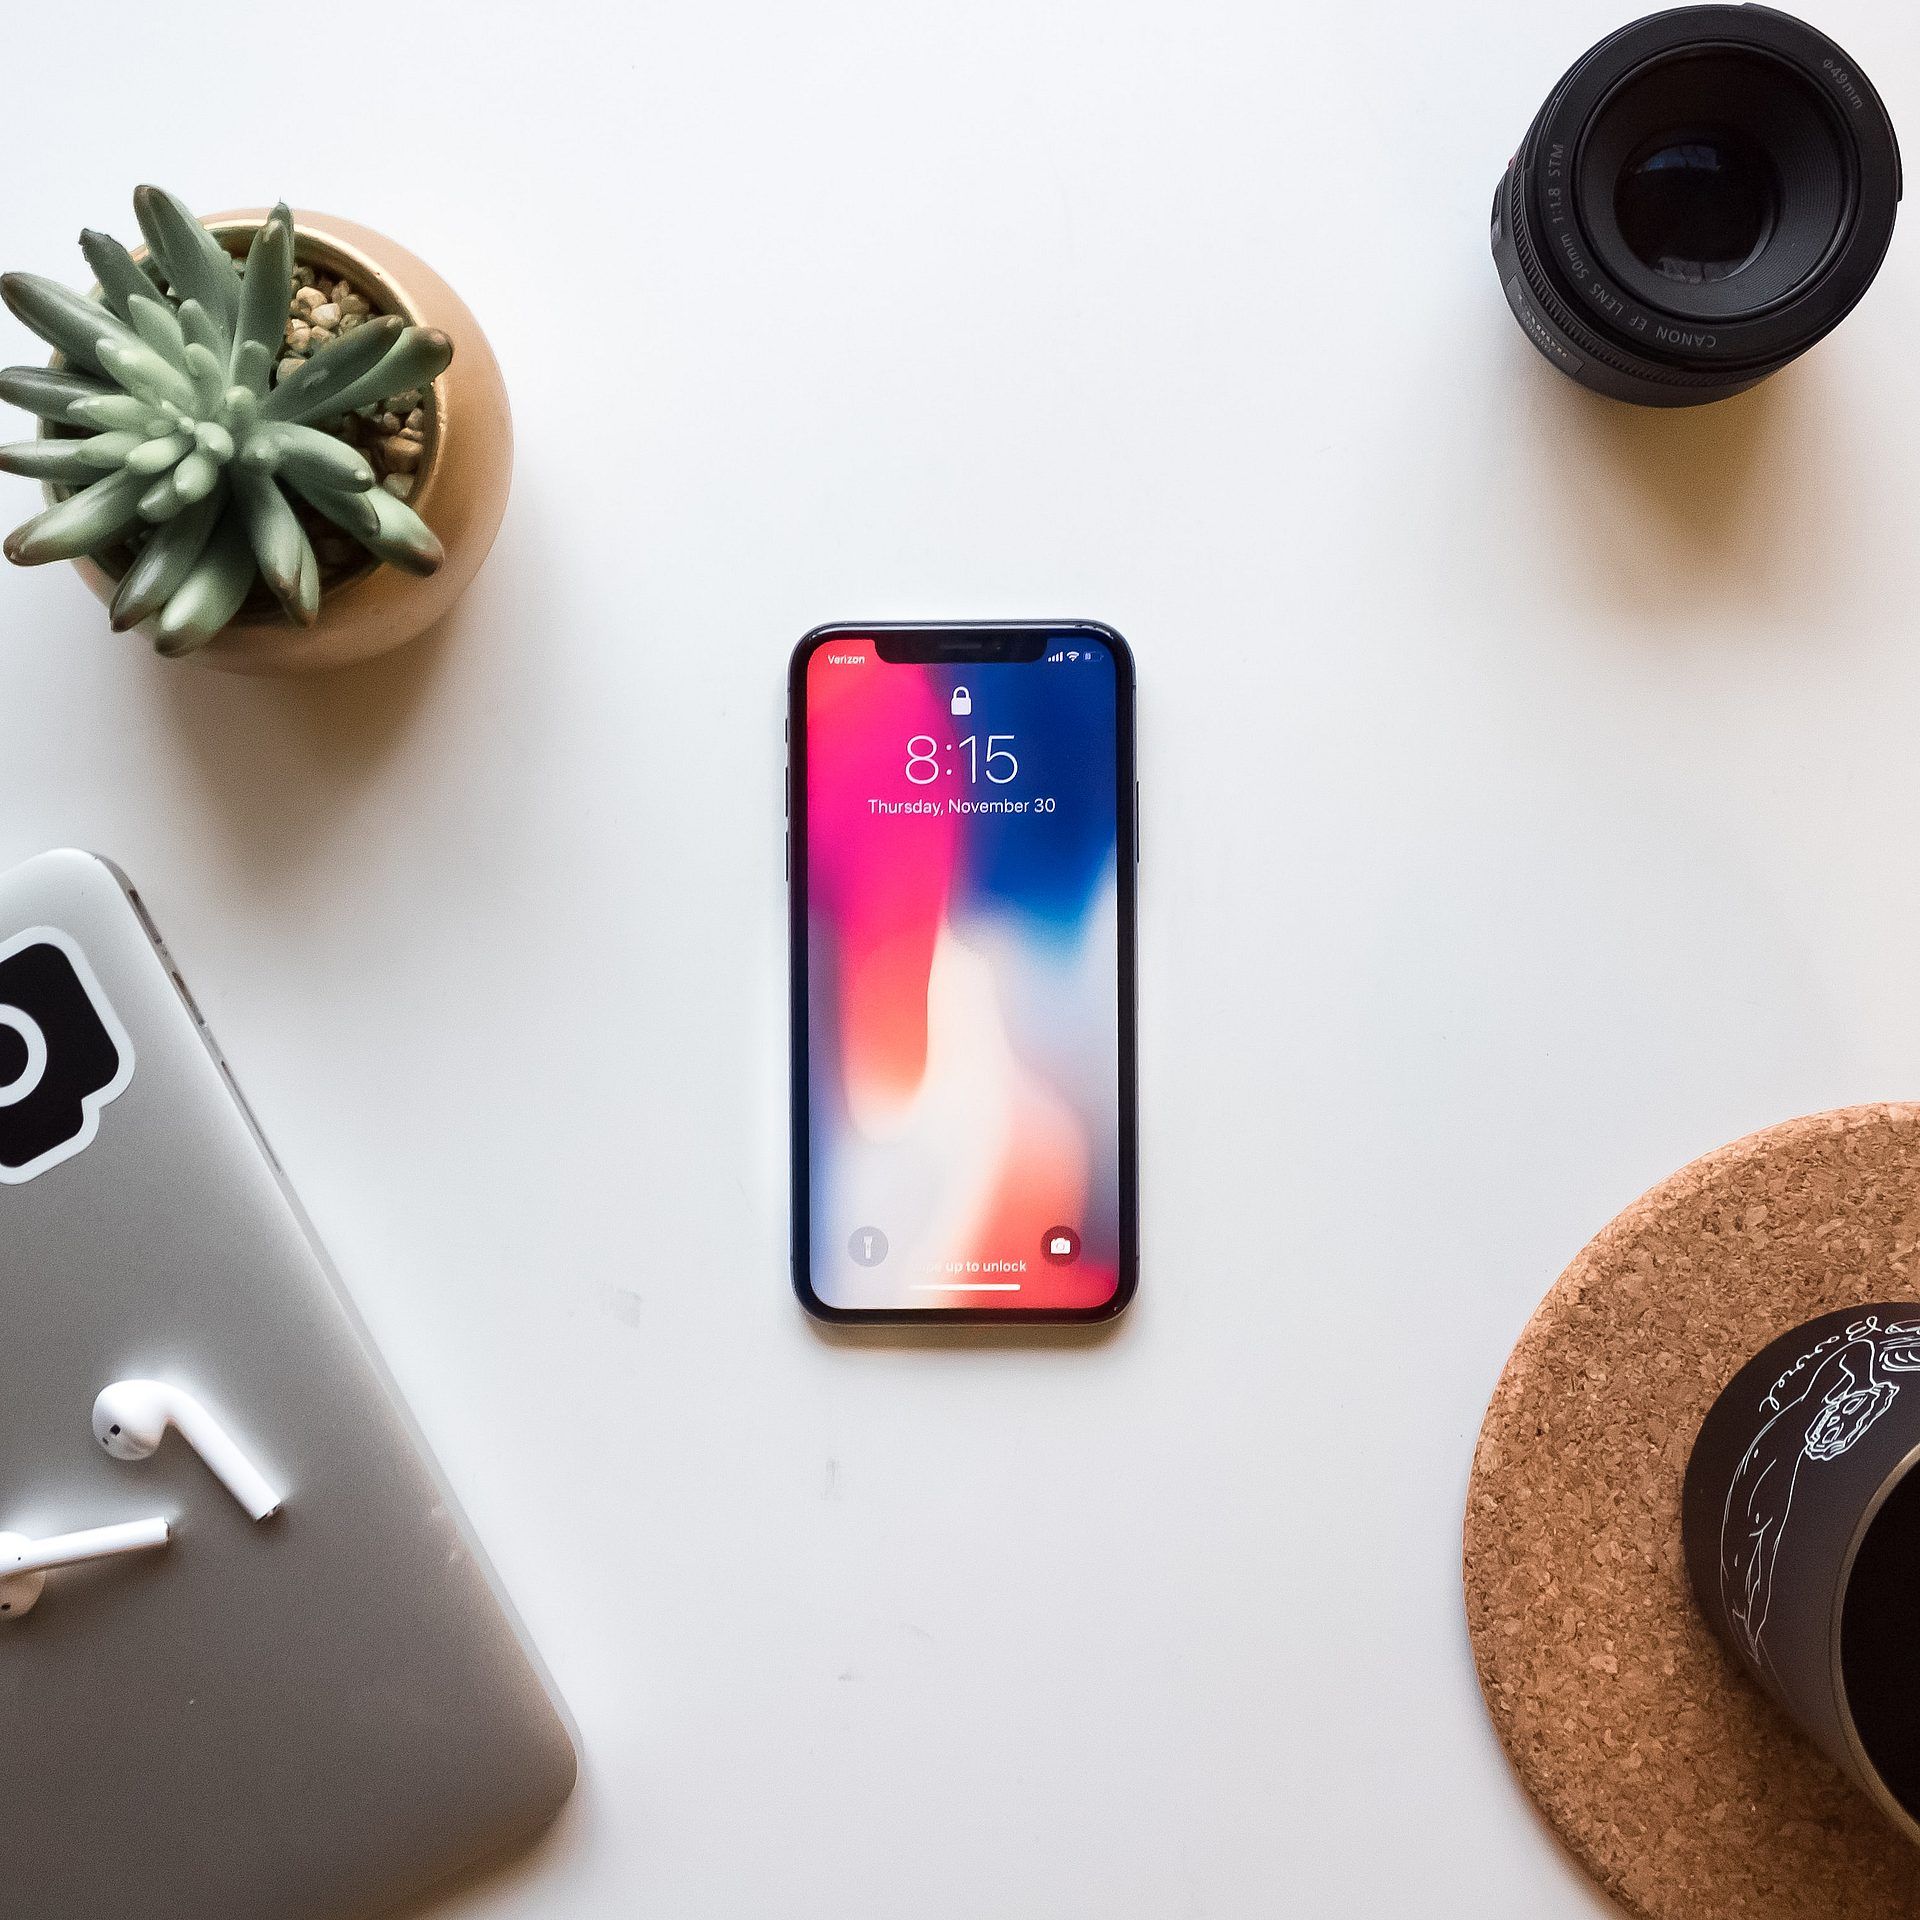 Learn why your iPhone is vibrating randomly and how to fix it with expert solutions in this comprehensive guide. Read on and explore now!